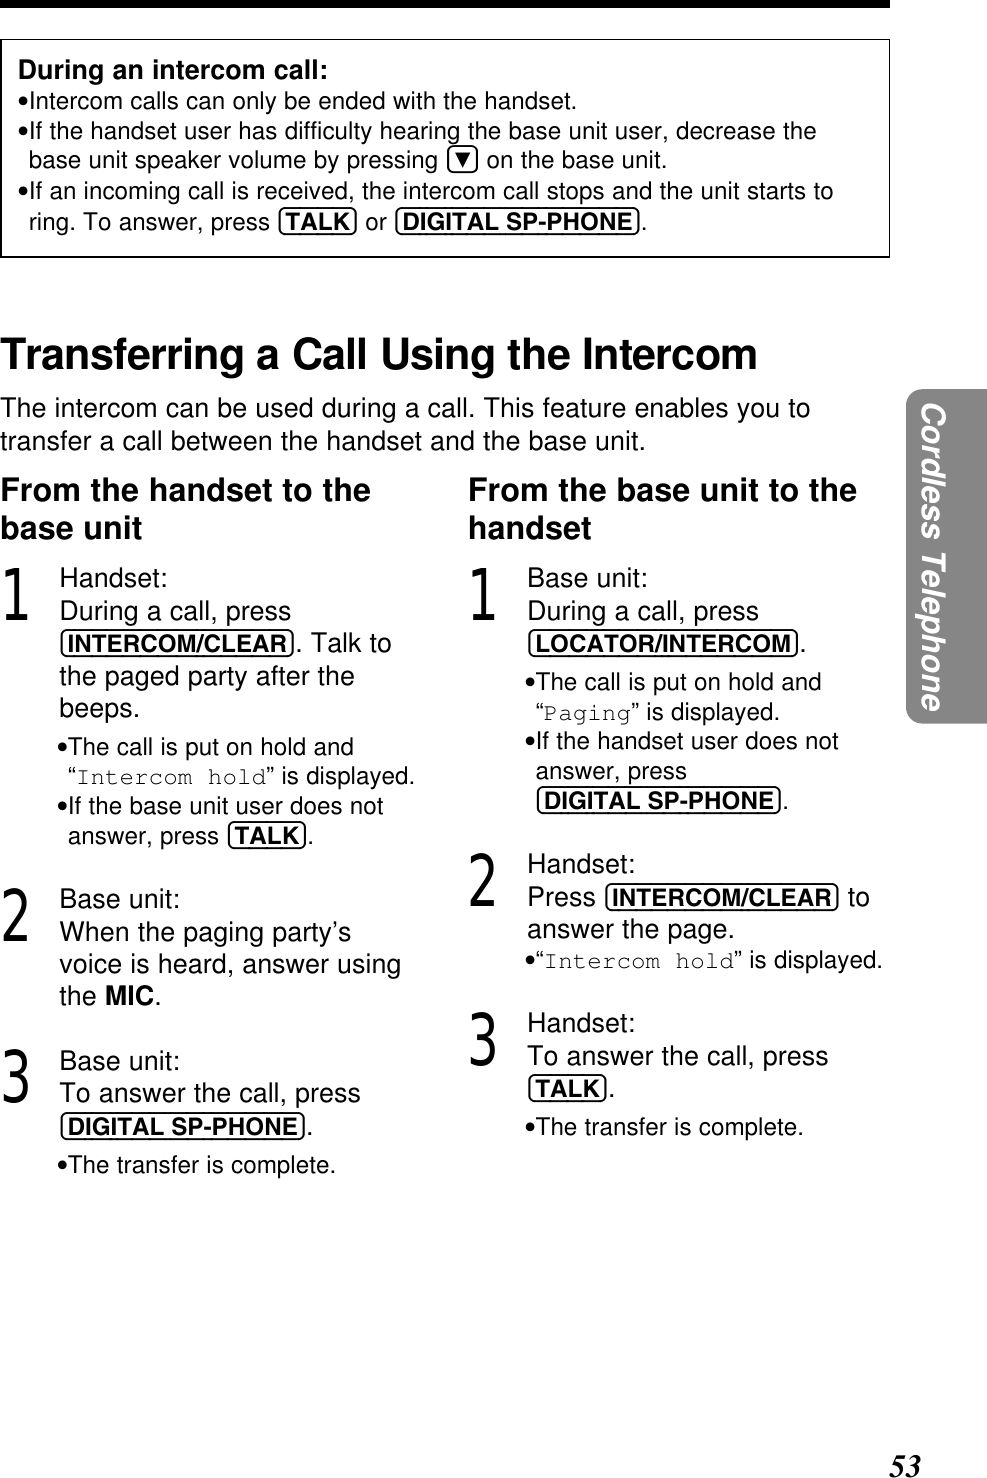 53Cordless TelephoneDuring an intercom call:•Intercom calls can only be ended with the handset.•If the handset user has difficulty hearing the base unit user, decrease thebase unit speaker volume by pressing Öon the base unit.•If an incoming call is received, the intercom call stops and the unit starts toring. To answer, press (TALK) or (DIGITAL!SP-PHONE).Transferring a Call Using the IntercomThe intercom can be used during a call. This feature enables you totransfer a call between the handset and the base unit.From the handset to thebase unit1Handset:During a call, press(INTERCOM/CLEAR). Talk tothe paged party after thebeeps.•The call is put on hold and“Intercom hold” is displayed.•If the base unit user does notanswer, press (TALK).2Base unit:When the paging party’svoice is heard, answer usingthe MIC.3Base unit:To answer the call, press(DIGITAL!SP-PHONE).•The transfer is complete.From the base unit to thehandset1Base unit:During a call, press(LOCATOR/INTERCOM).•The call is put on hold and“Paging” is displayed.•If the handset user does notanswer, press(DIGITAL!SP-PHONE).2Handset:Press (INTERCOM/CLEAR) toanswer the page.•“Intercom hold” is displayed.3Handset:To answer the call, press(TALK).•The transfer is complete.